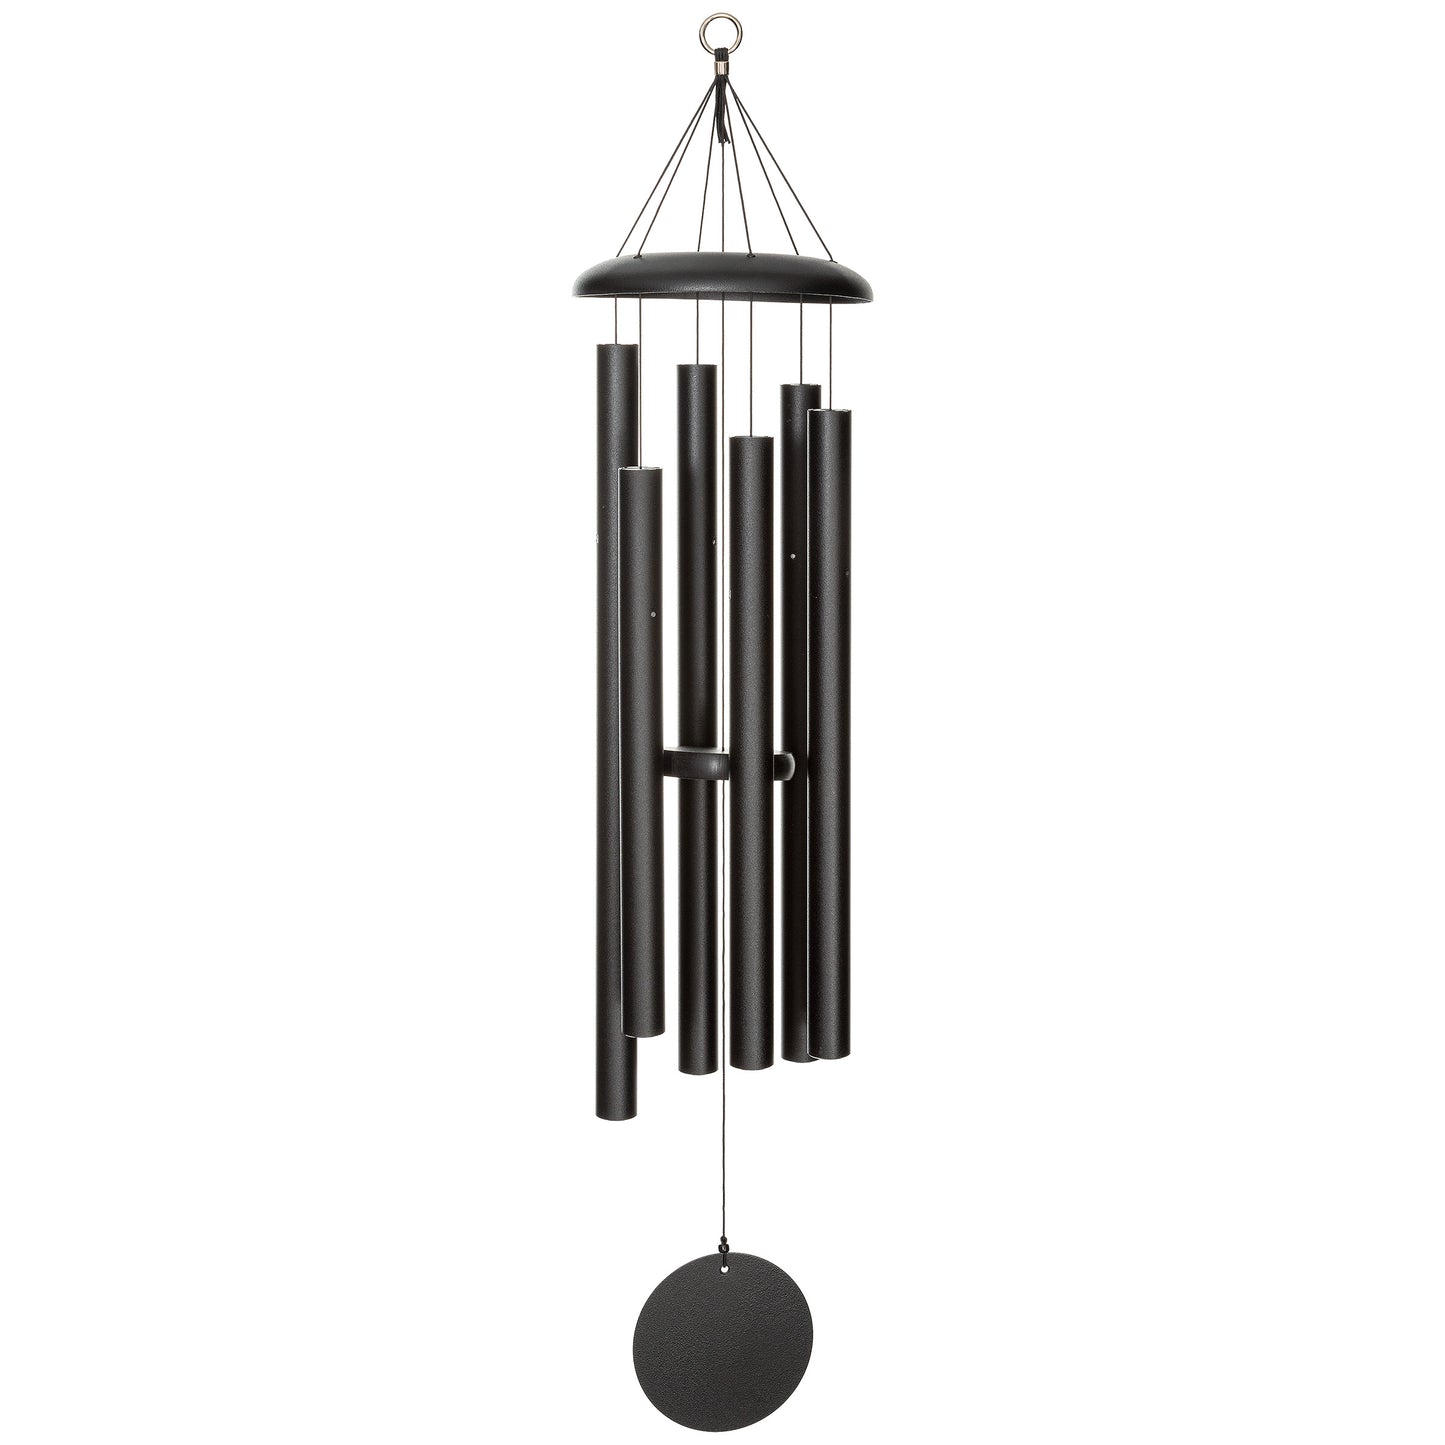 These Black Wind River Corinthian Bells wind chimes from Home and Garden Treasures are crafted with six hollow tubes of varying sizes suspended from a central ring, creating enchanting melodies as they dance in the breeze. Complete with a stylish round metal sail that catches gentle winds, each Corinthian Bell exemplifies timeless elegance and superior craftsmanship. Elevate your garden retreat with the perfect gift today!